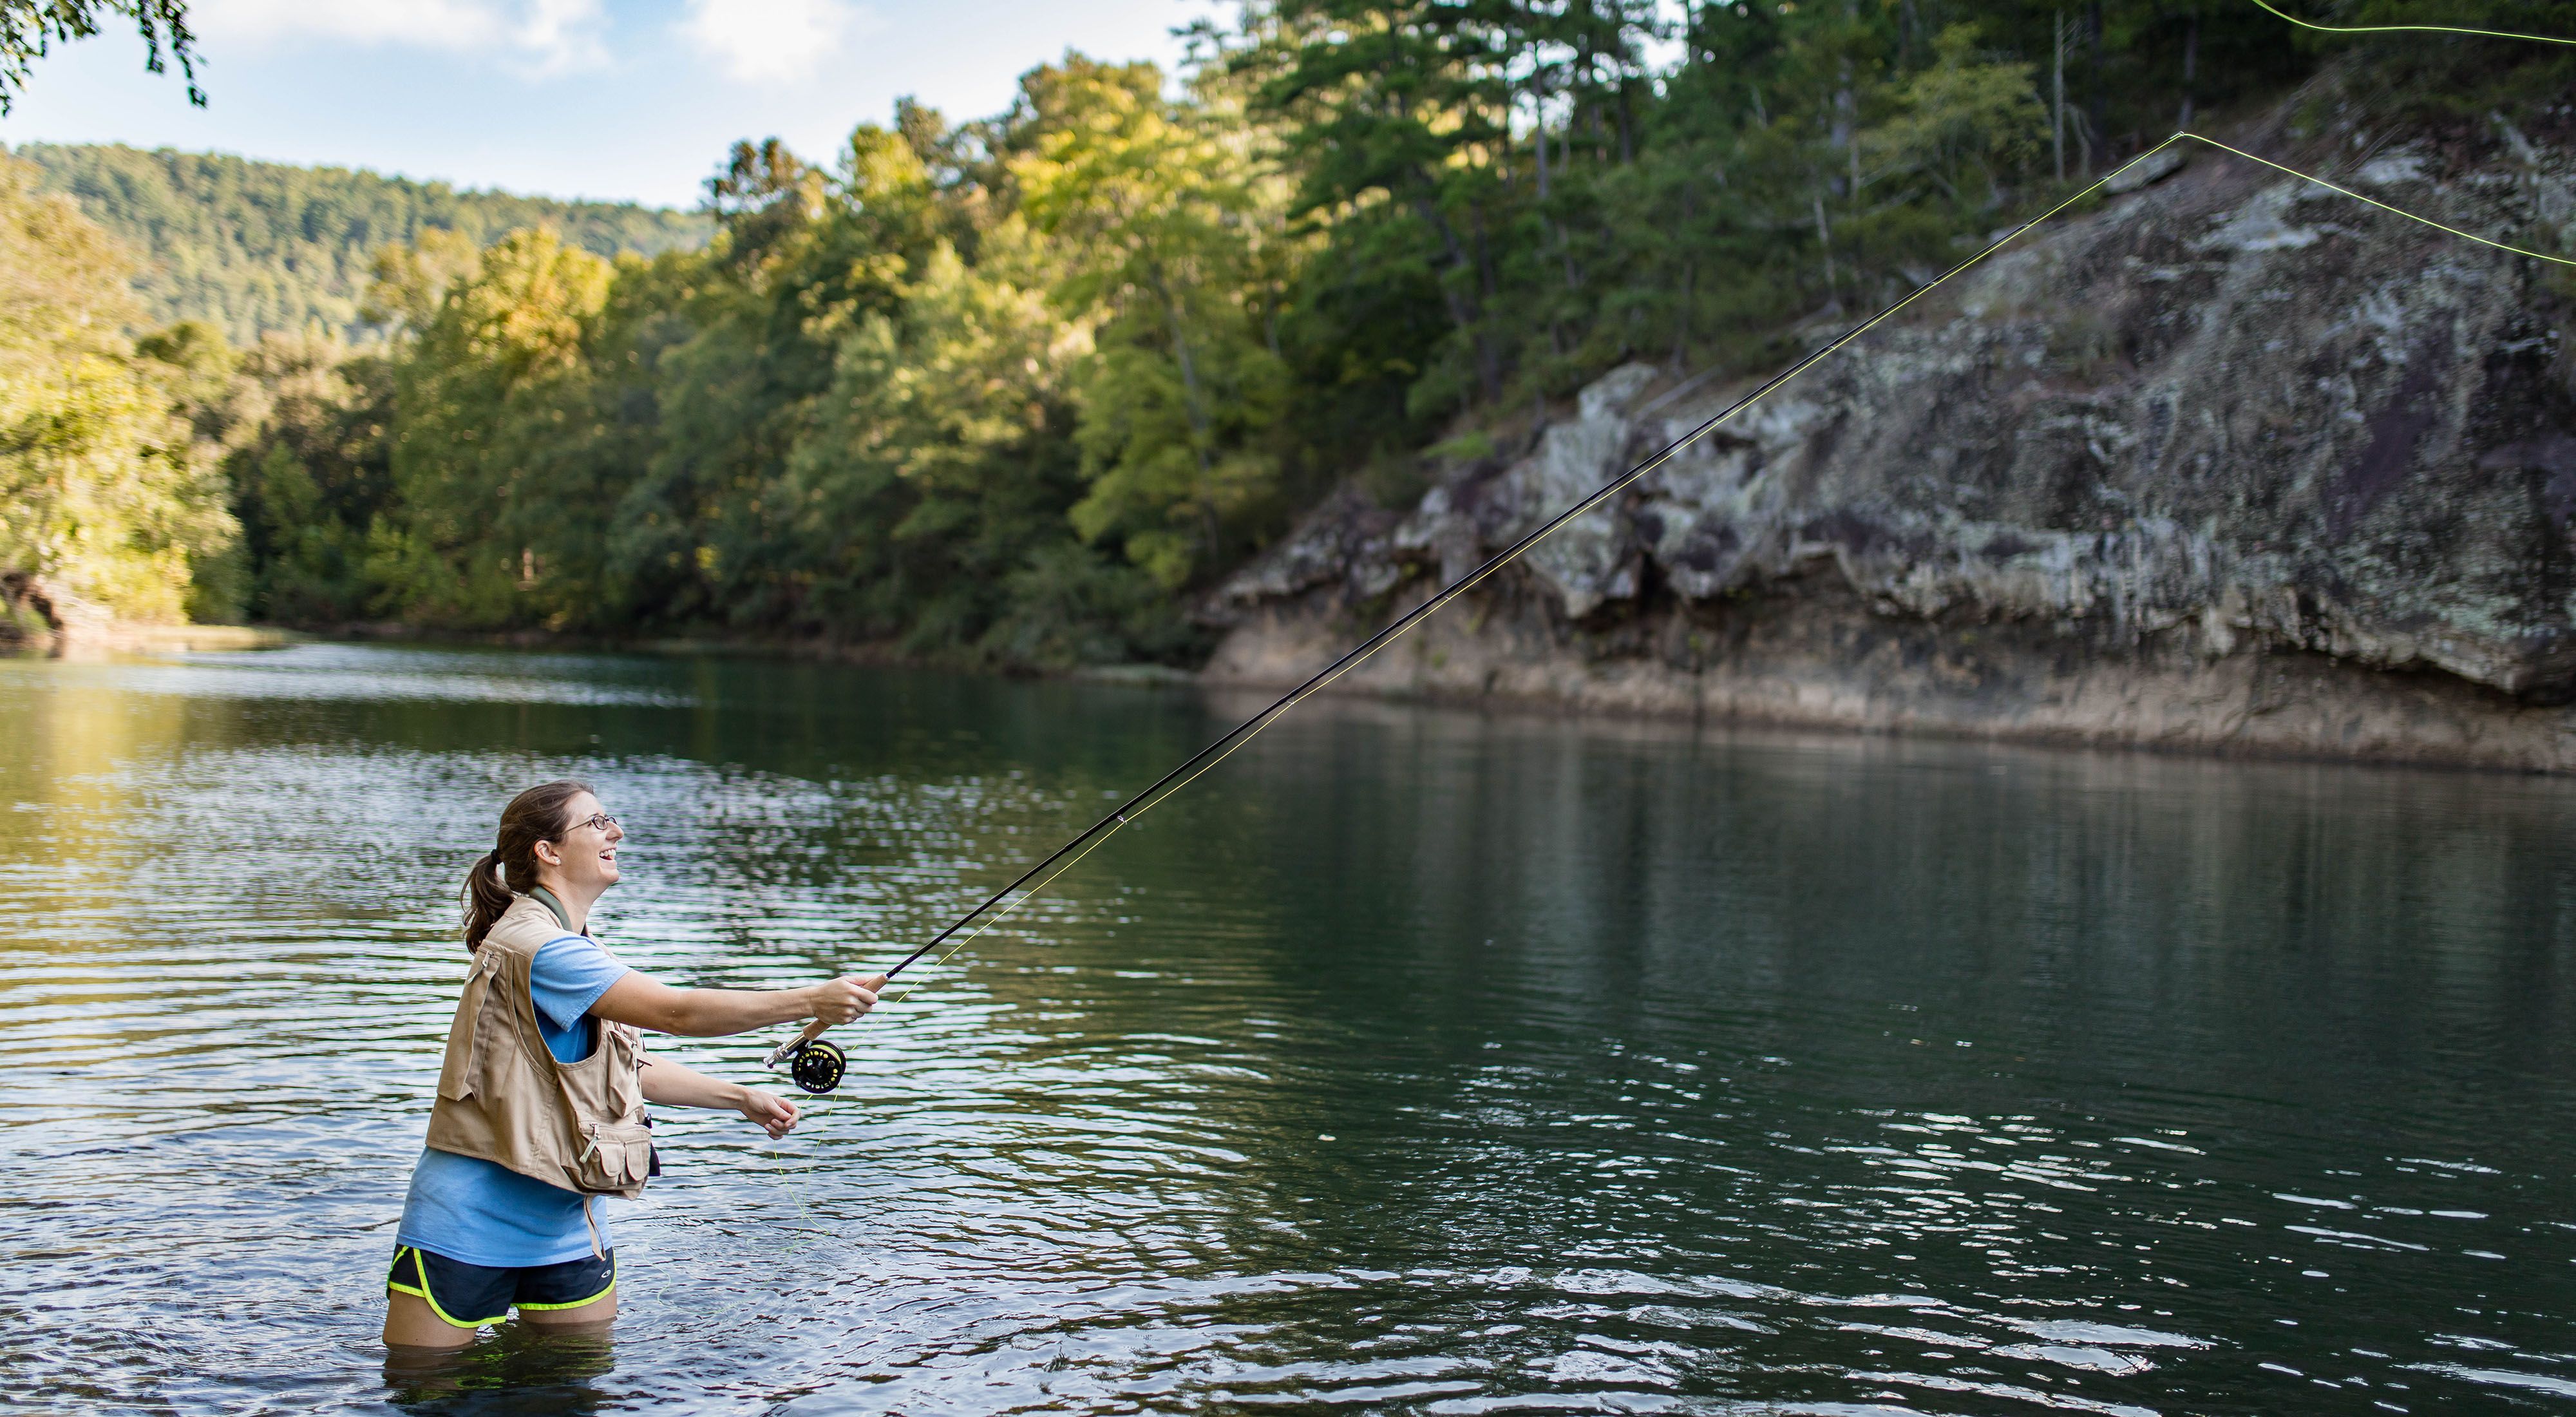 A smiling woman in a fishing vest and waders casting a line on the edge of a river, with rock bluffs in the background.